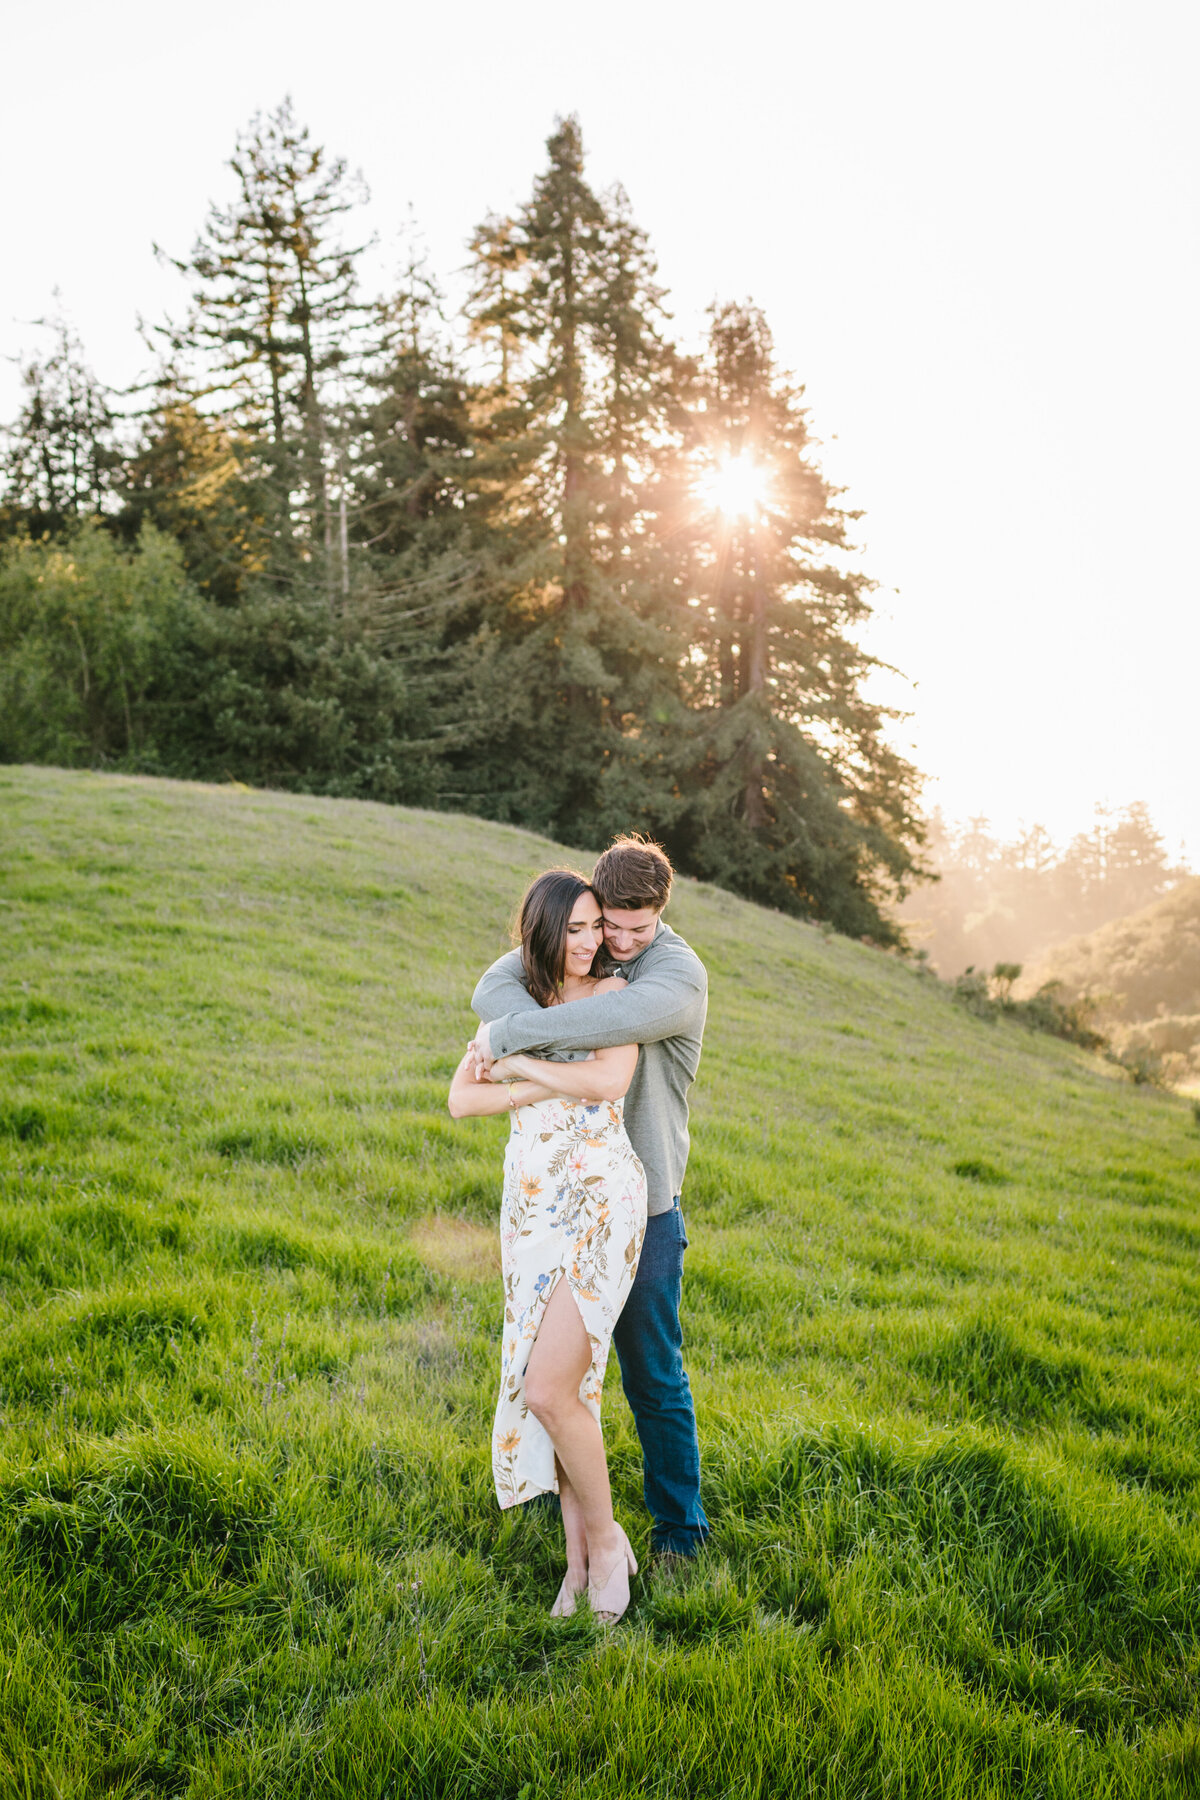 Best California and Texas Engagement Photographer-Jodee Debes Photography-99